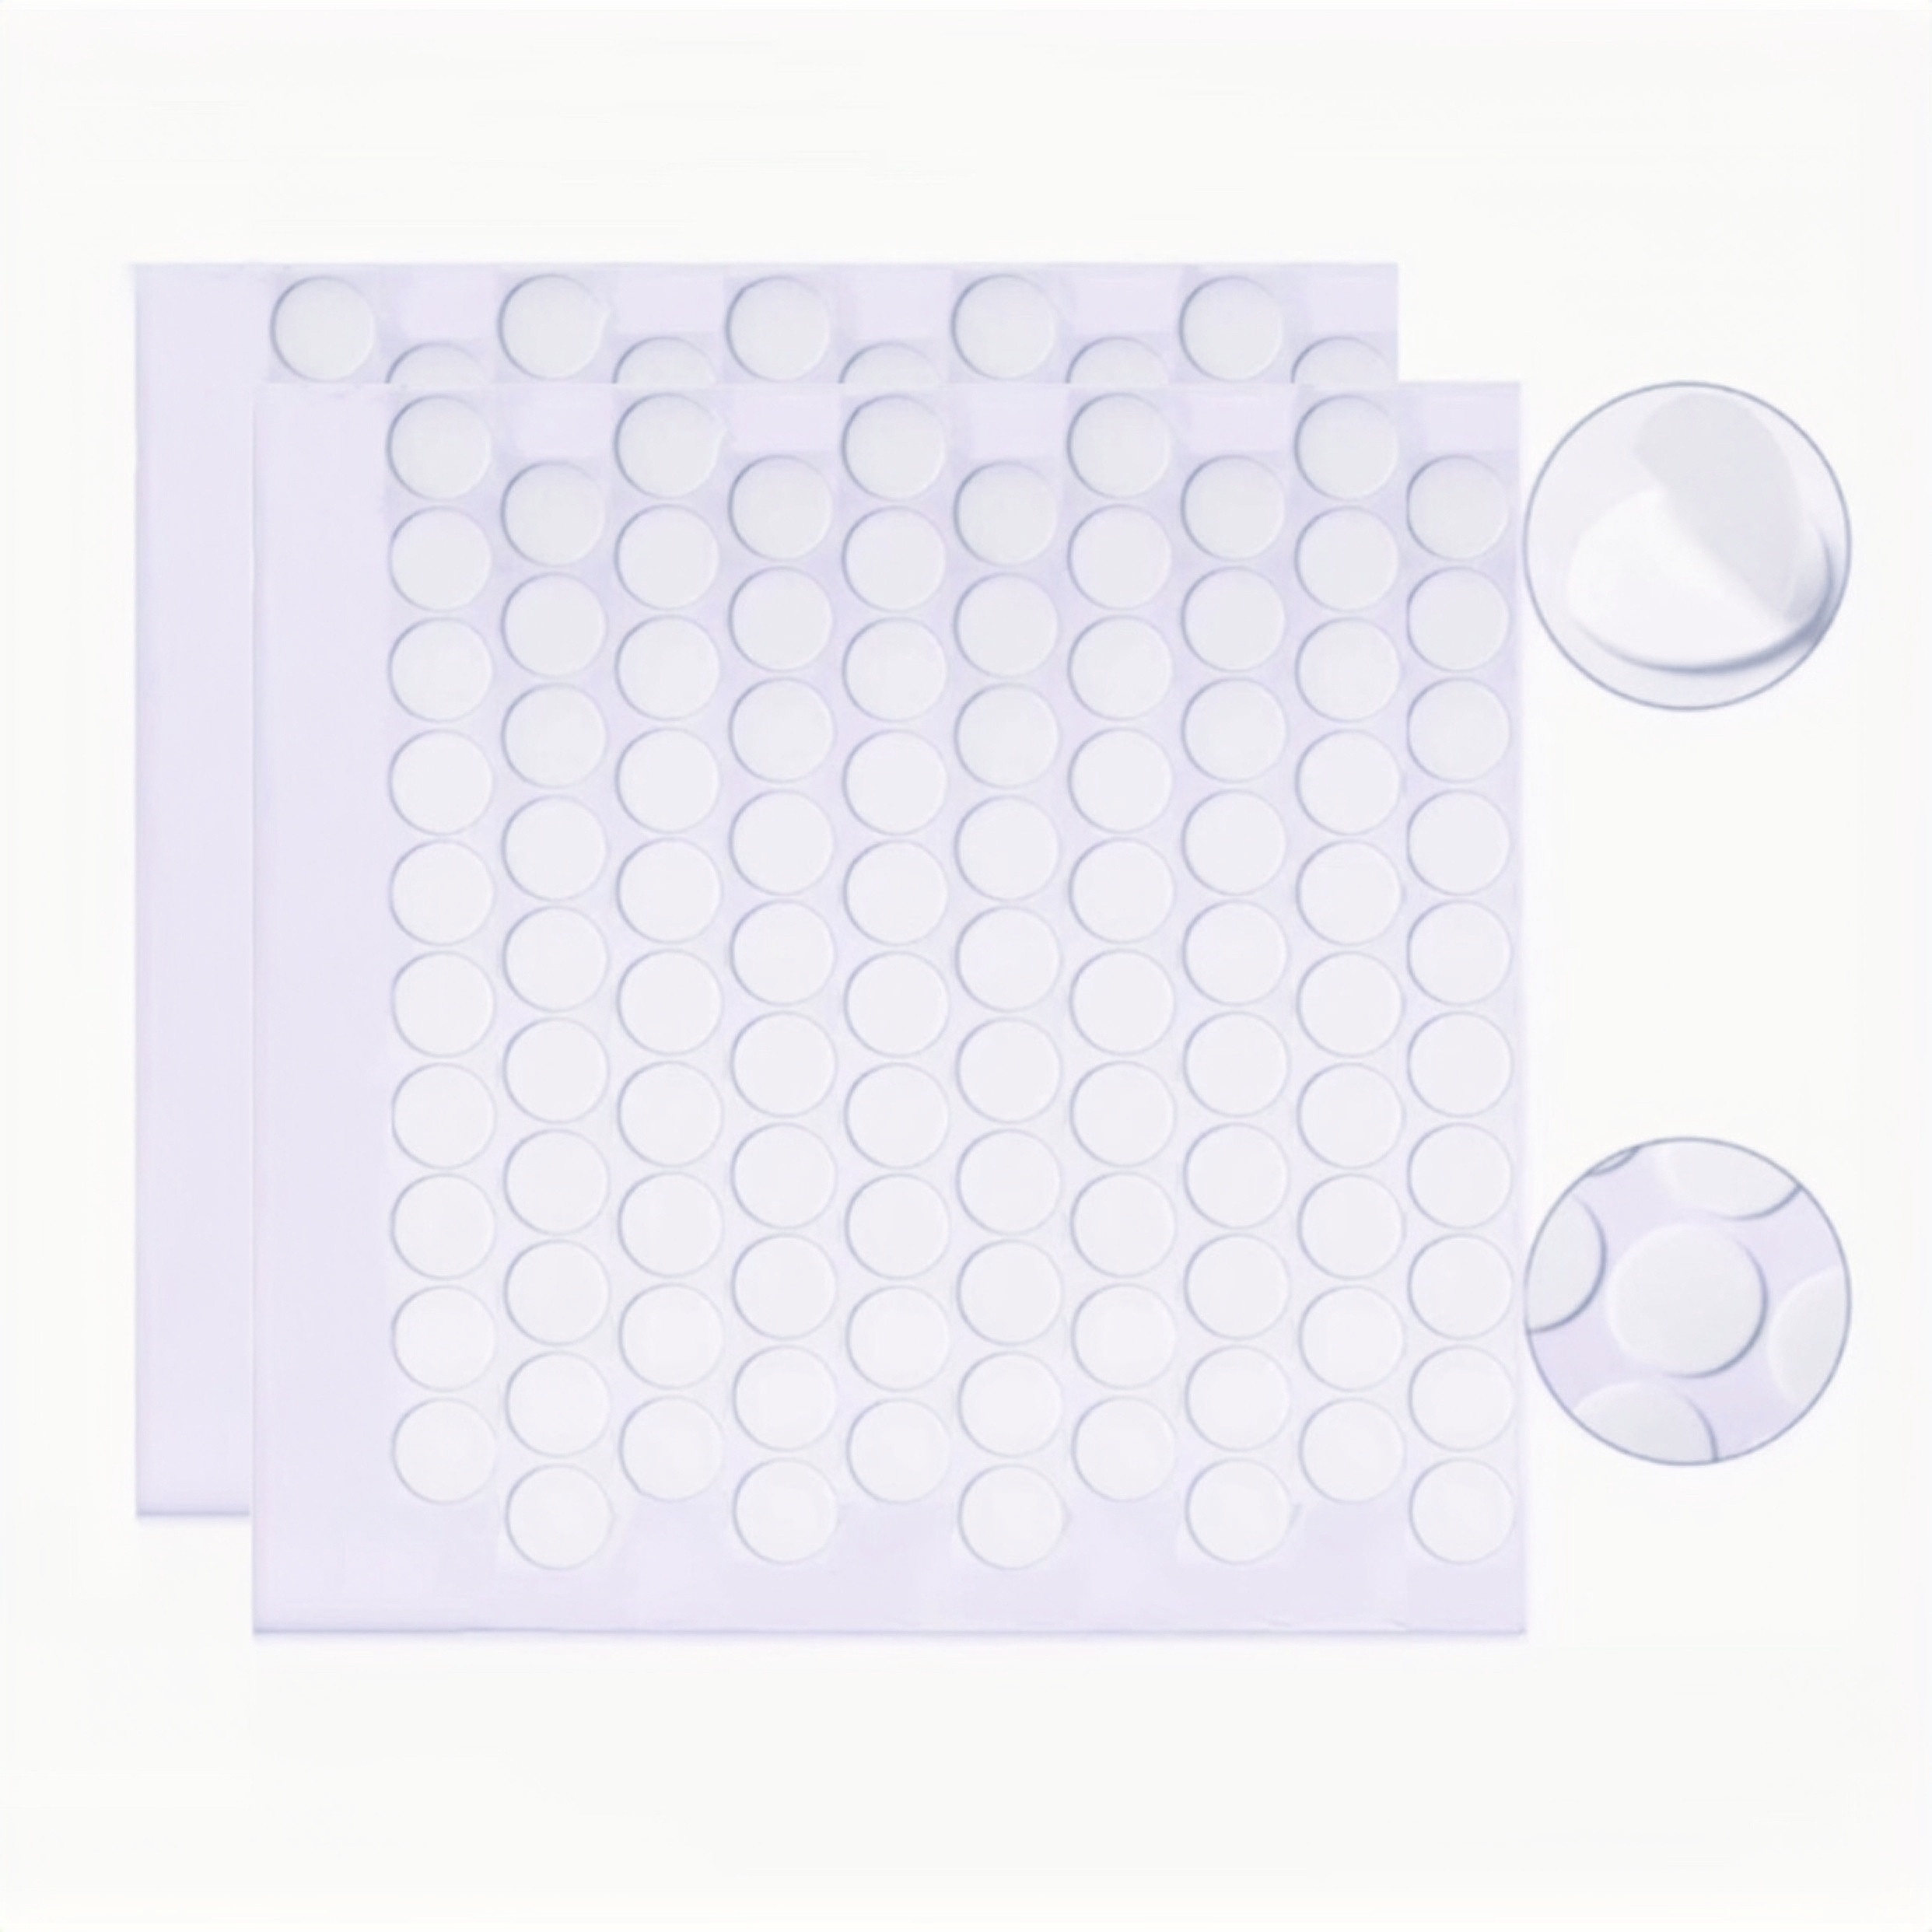 Large Double Sided Sticky Dots 200PCs - Clear Round Mounting Putty - Sticky  Tack for Wall Hanging - Picture Hangers Without